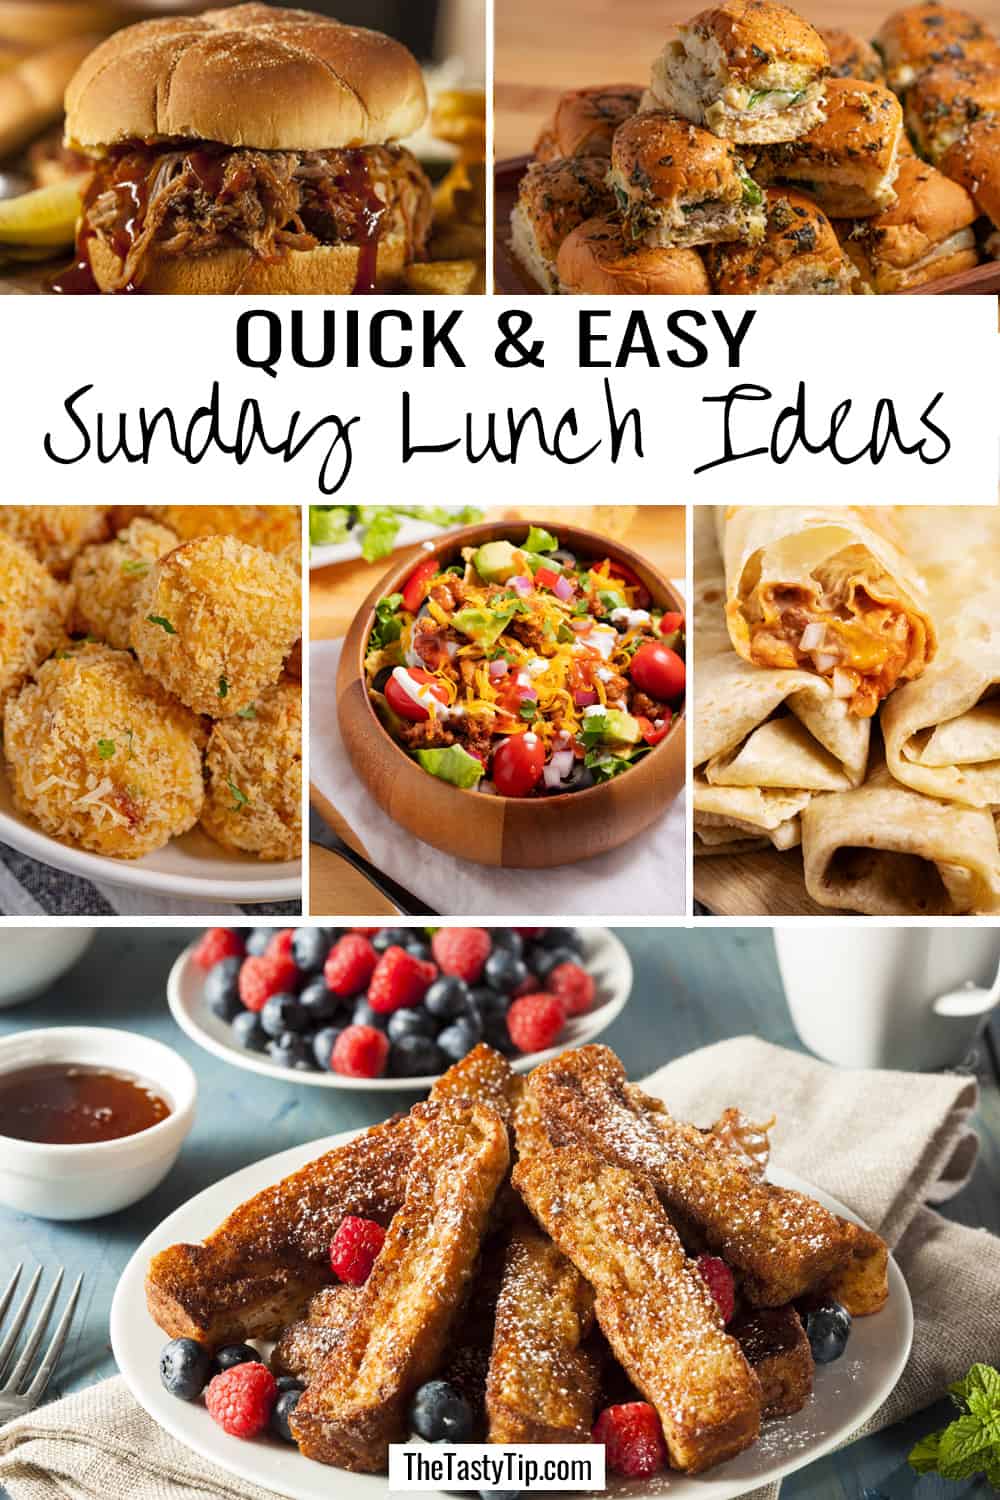 Examples of quick Sunday lunch ideas.